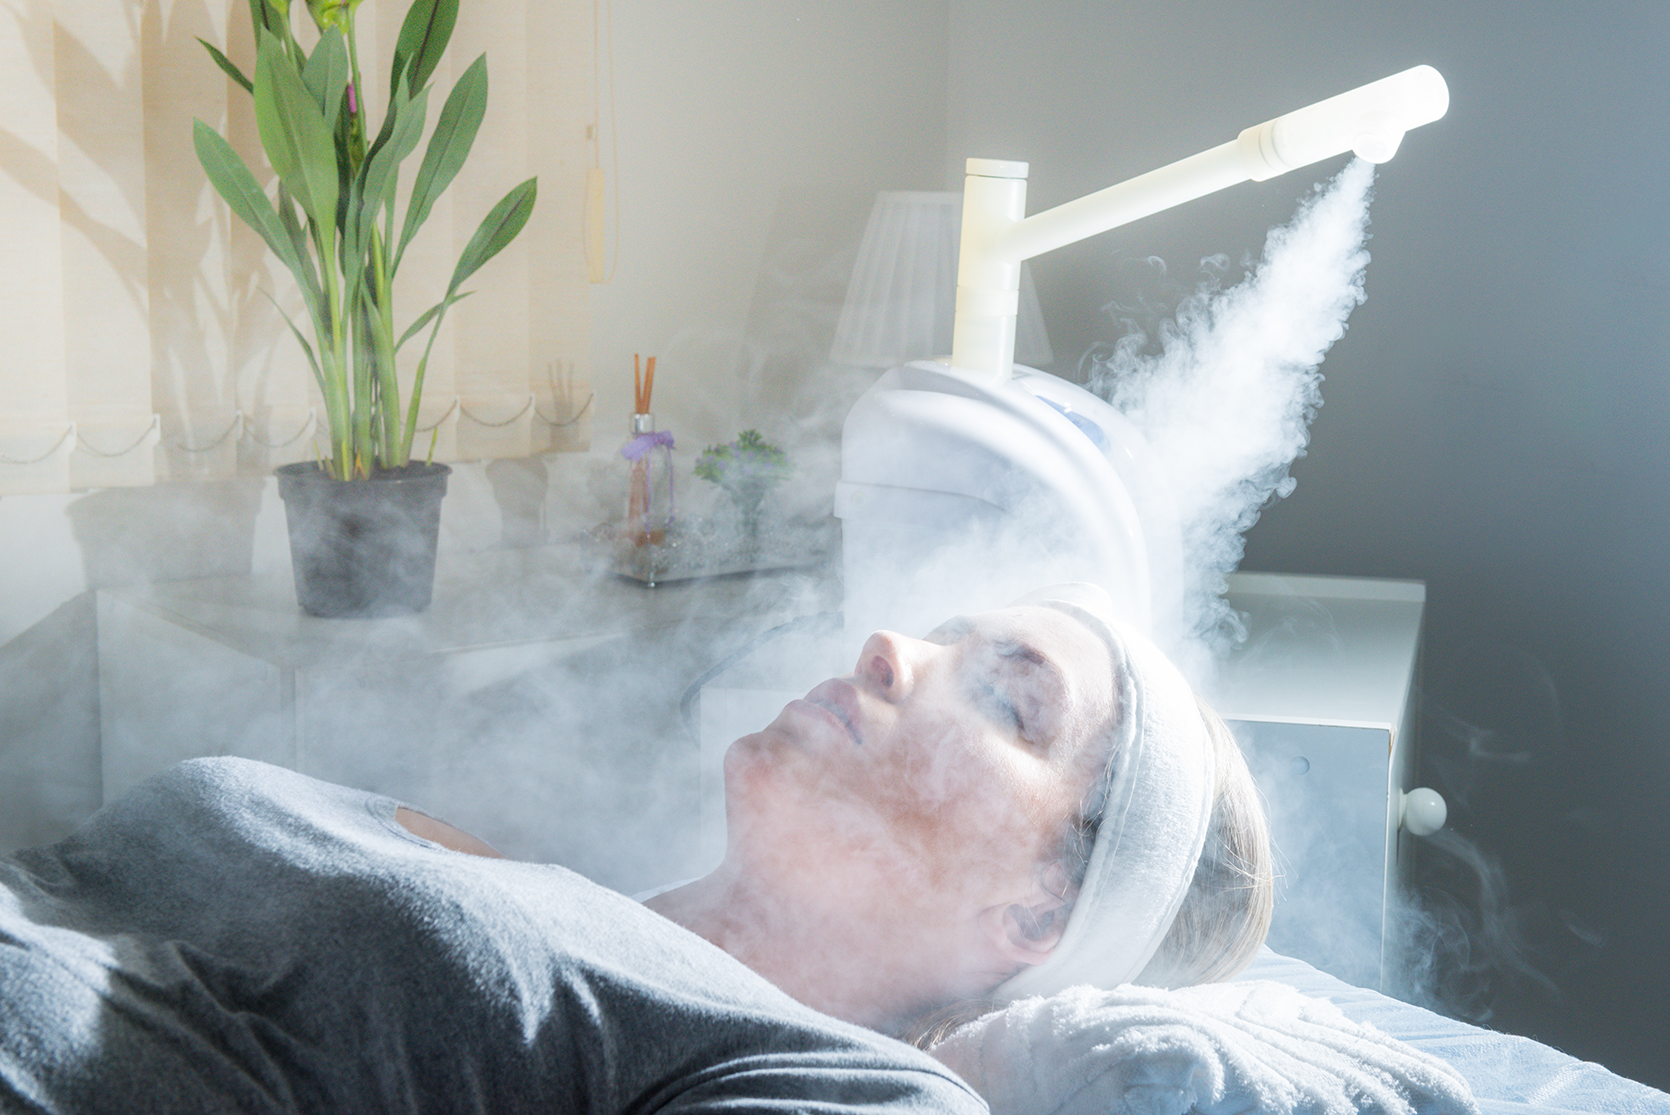 woman receiving face steam during her facial treatment